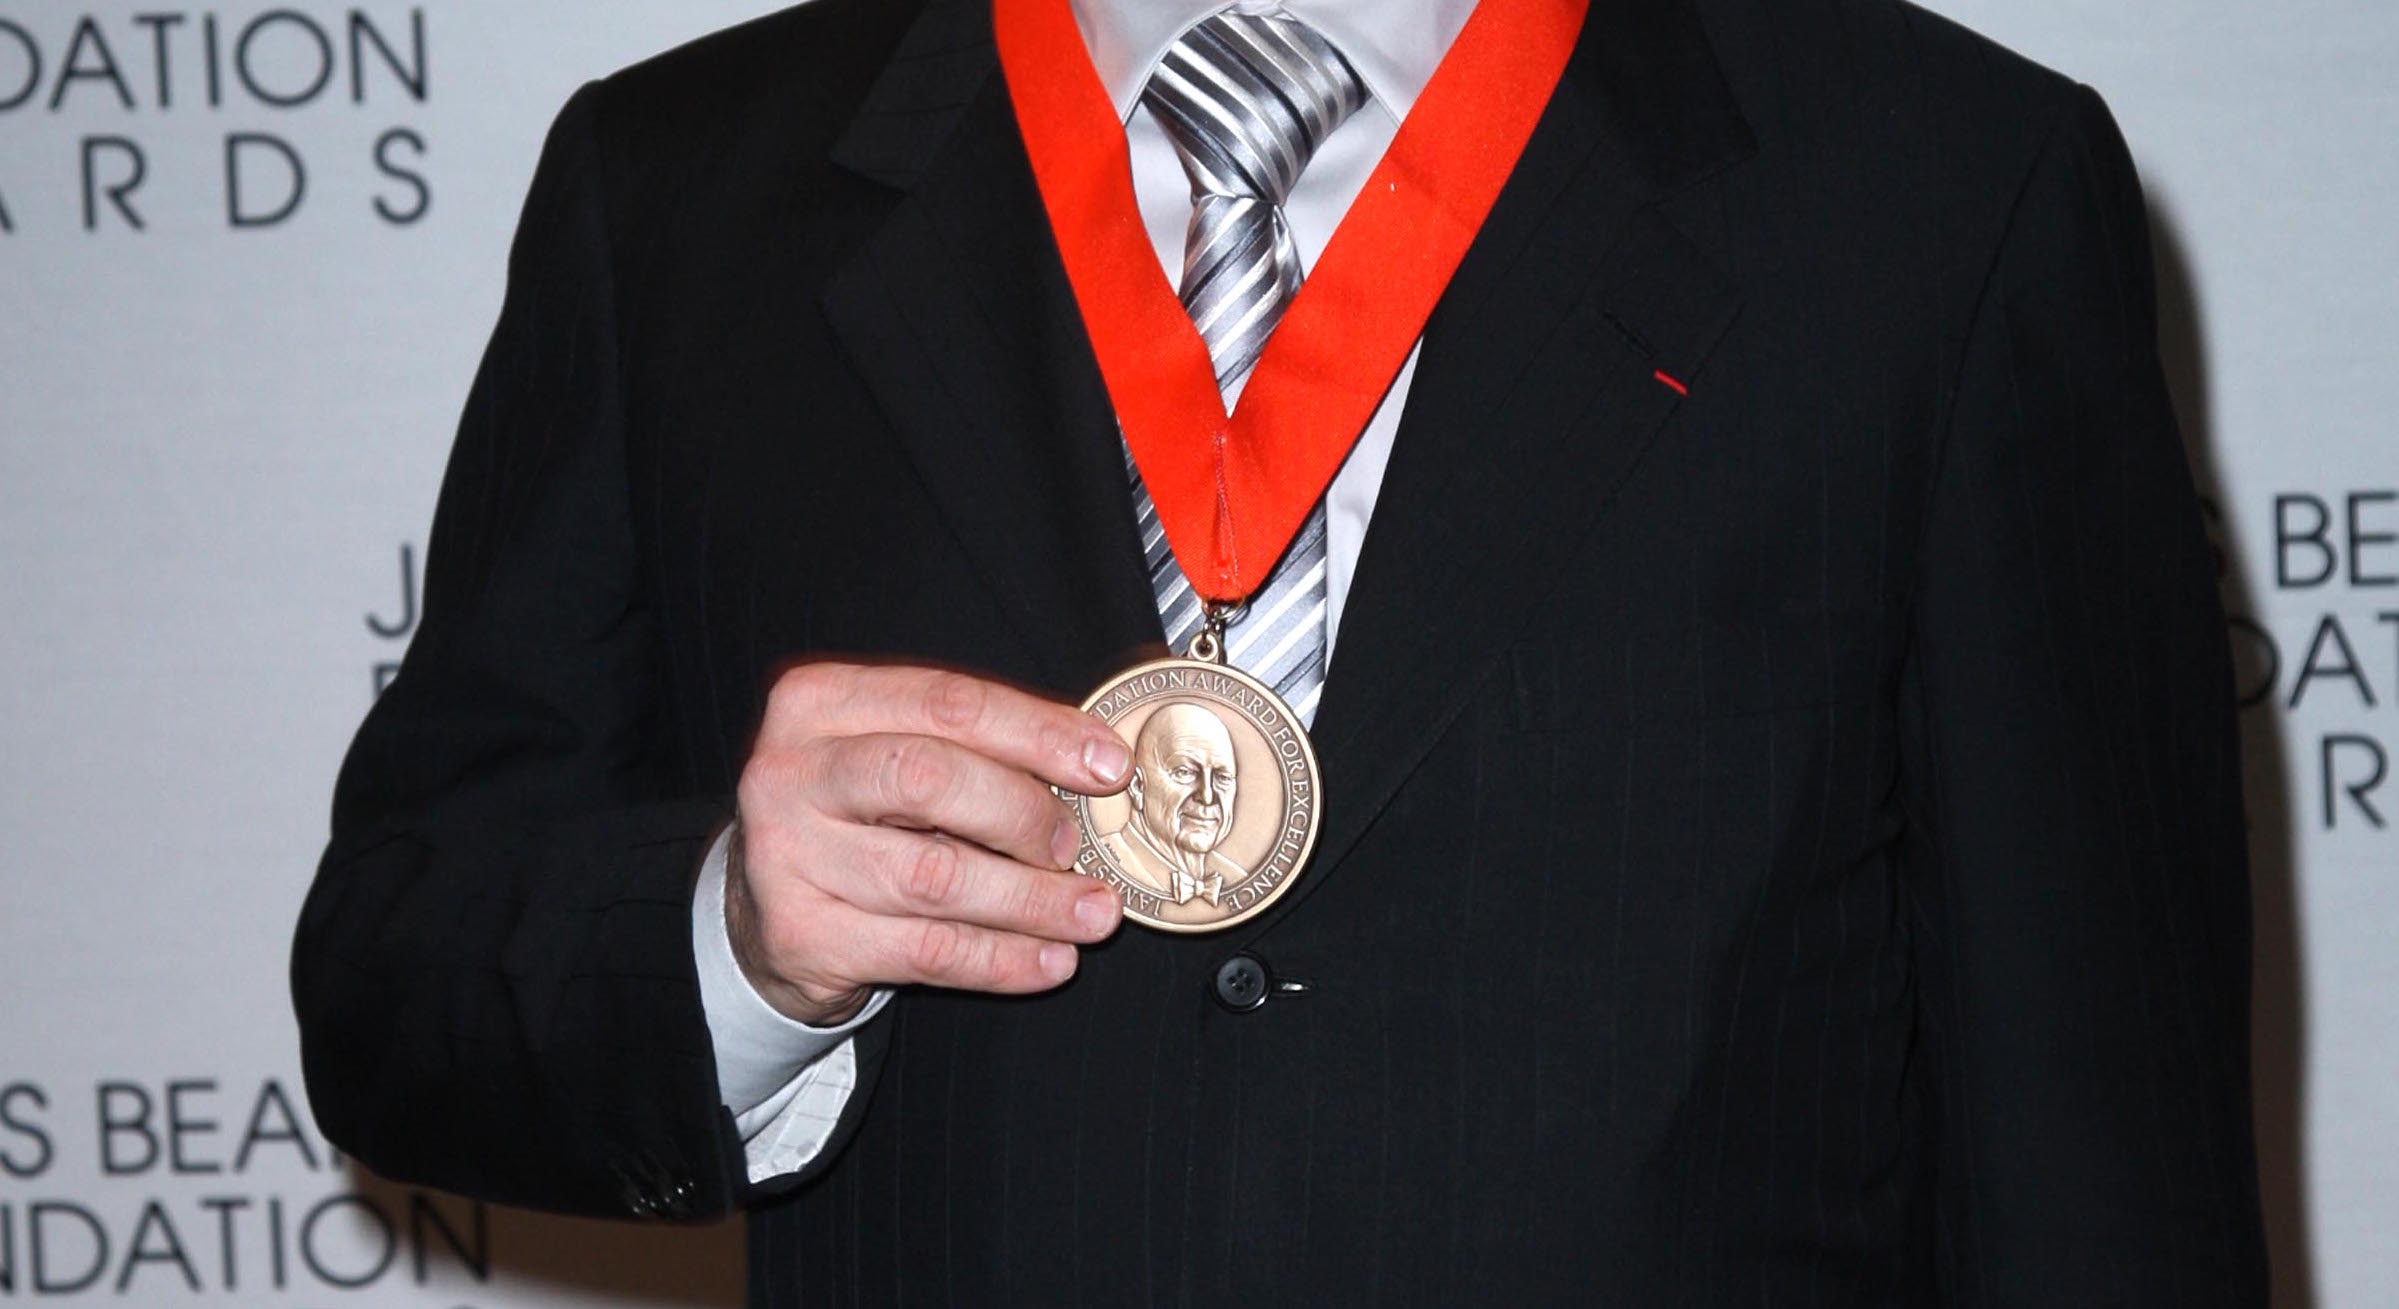 Photo shows someone holding up James Beard award medal, on ribbon around their neck.